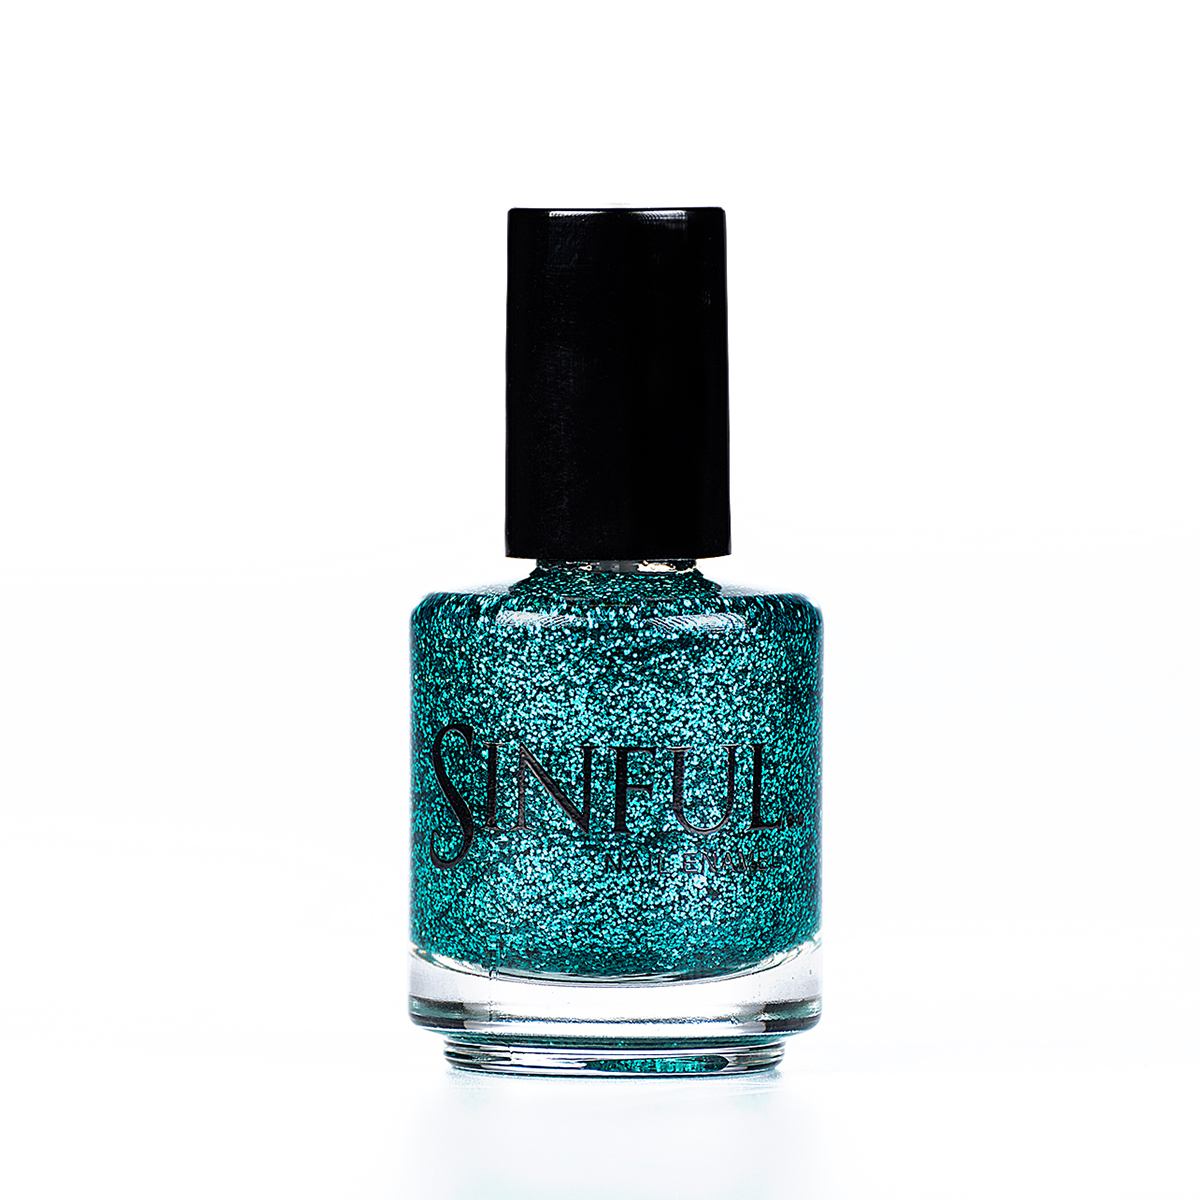 Turquoise glitter - Vixen Can be applied over a green or blue undercoat to give a quick, dazzling effect. For a full nail super glitter effect, apply 2-3 layers with a top coat. 15ml